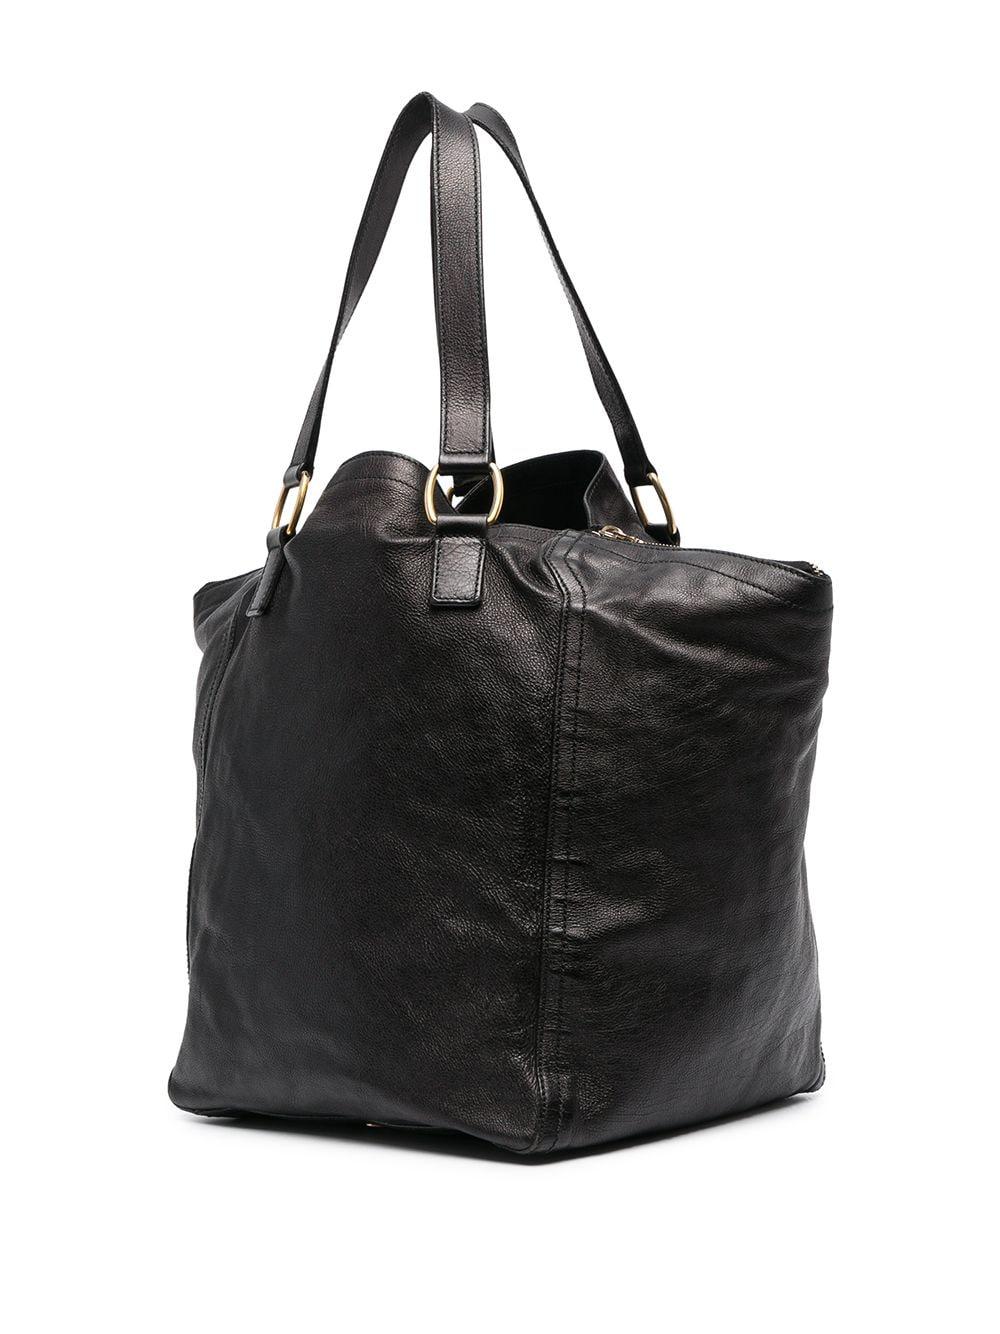 Yves Saint Laurent YSL black leather Downtown tote bag featuring side zip fastening, gold-tone hardware, decorative buckle detailing, flat top handles, full lining, bottom large YSL pitted. 
Length 13.7in. (35cm)
Height  18.5 in (47cm)
Depth 9.8in.